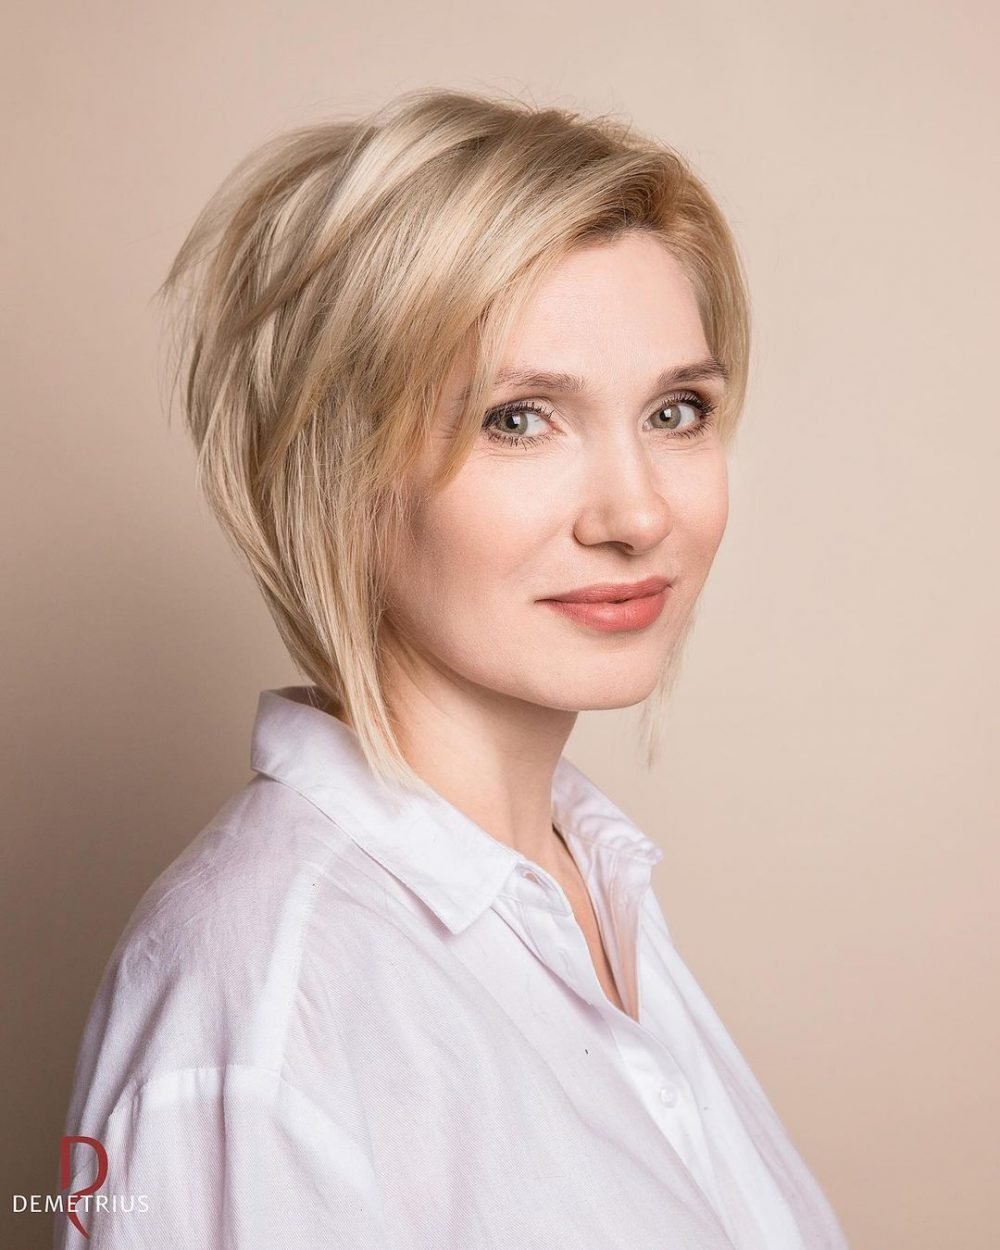 Contemporary Blonde Inverted Bob for Women in Their 40s